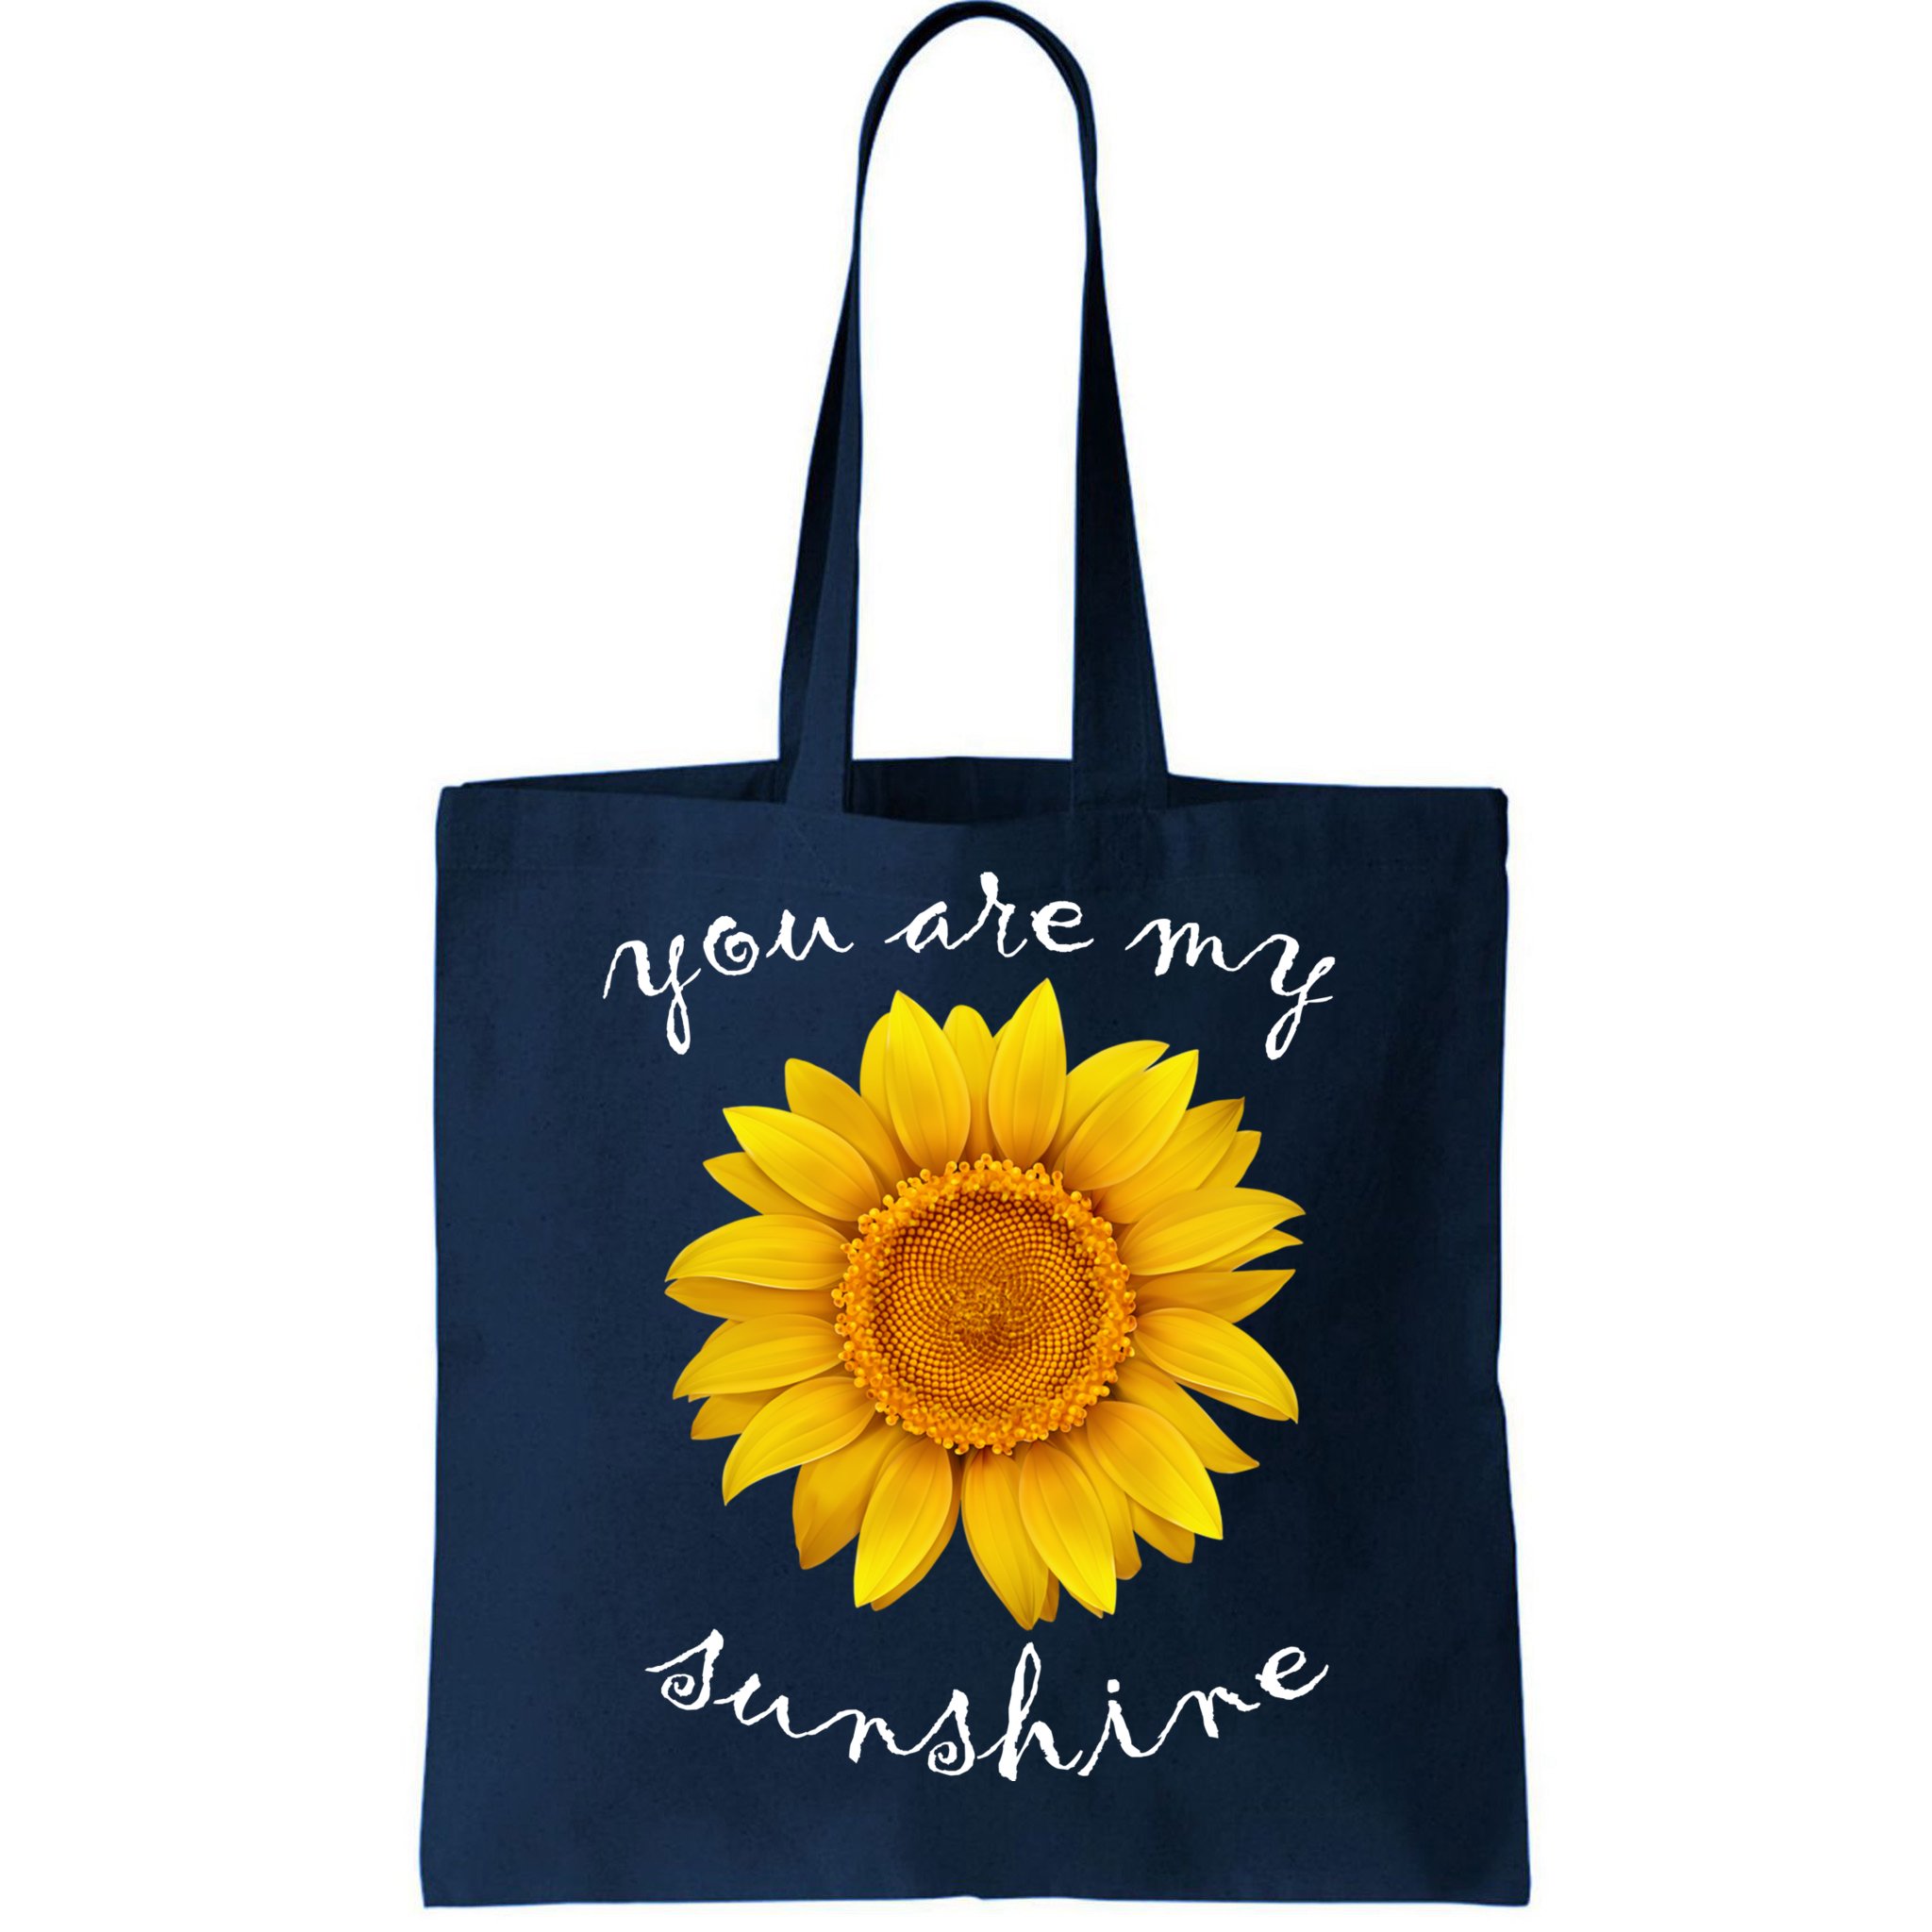 Sunflower Tote Bag: Polyester; 3 sizes; Double-sided print – PAMELA'S ART  by PonsART - a Gift Shop and Marketplace